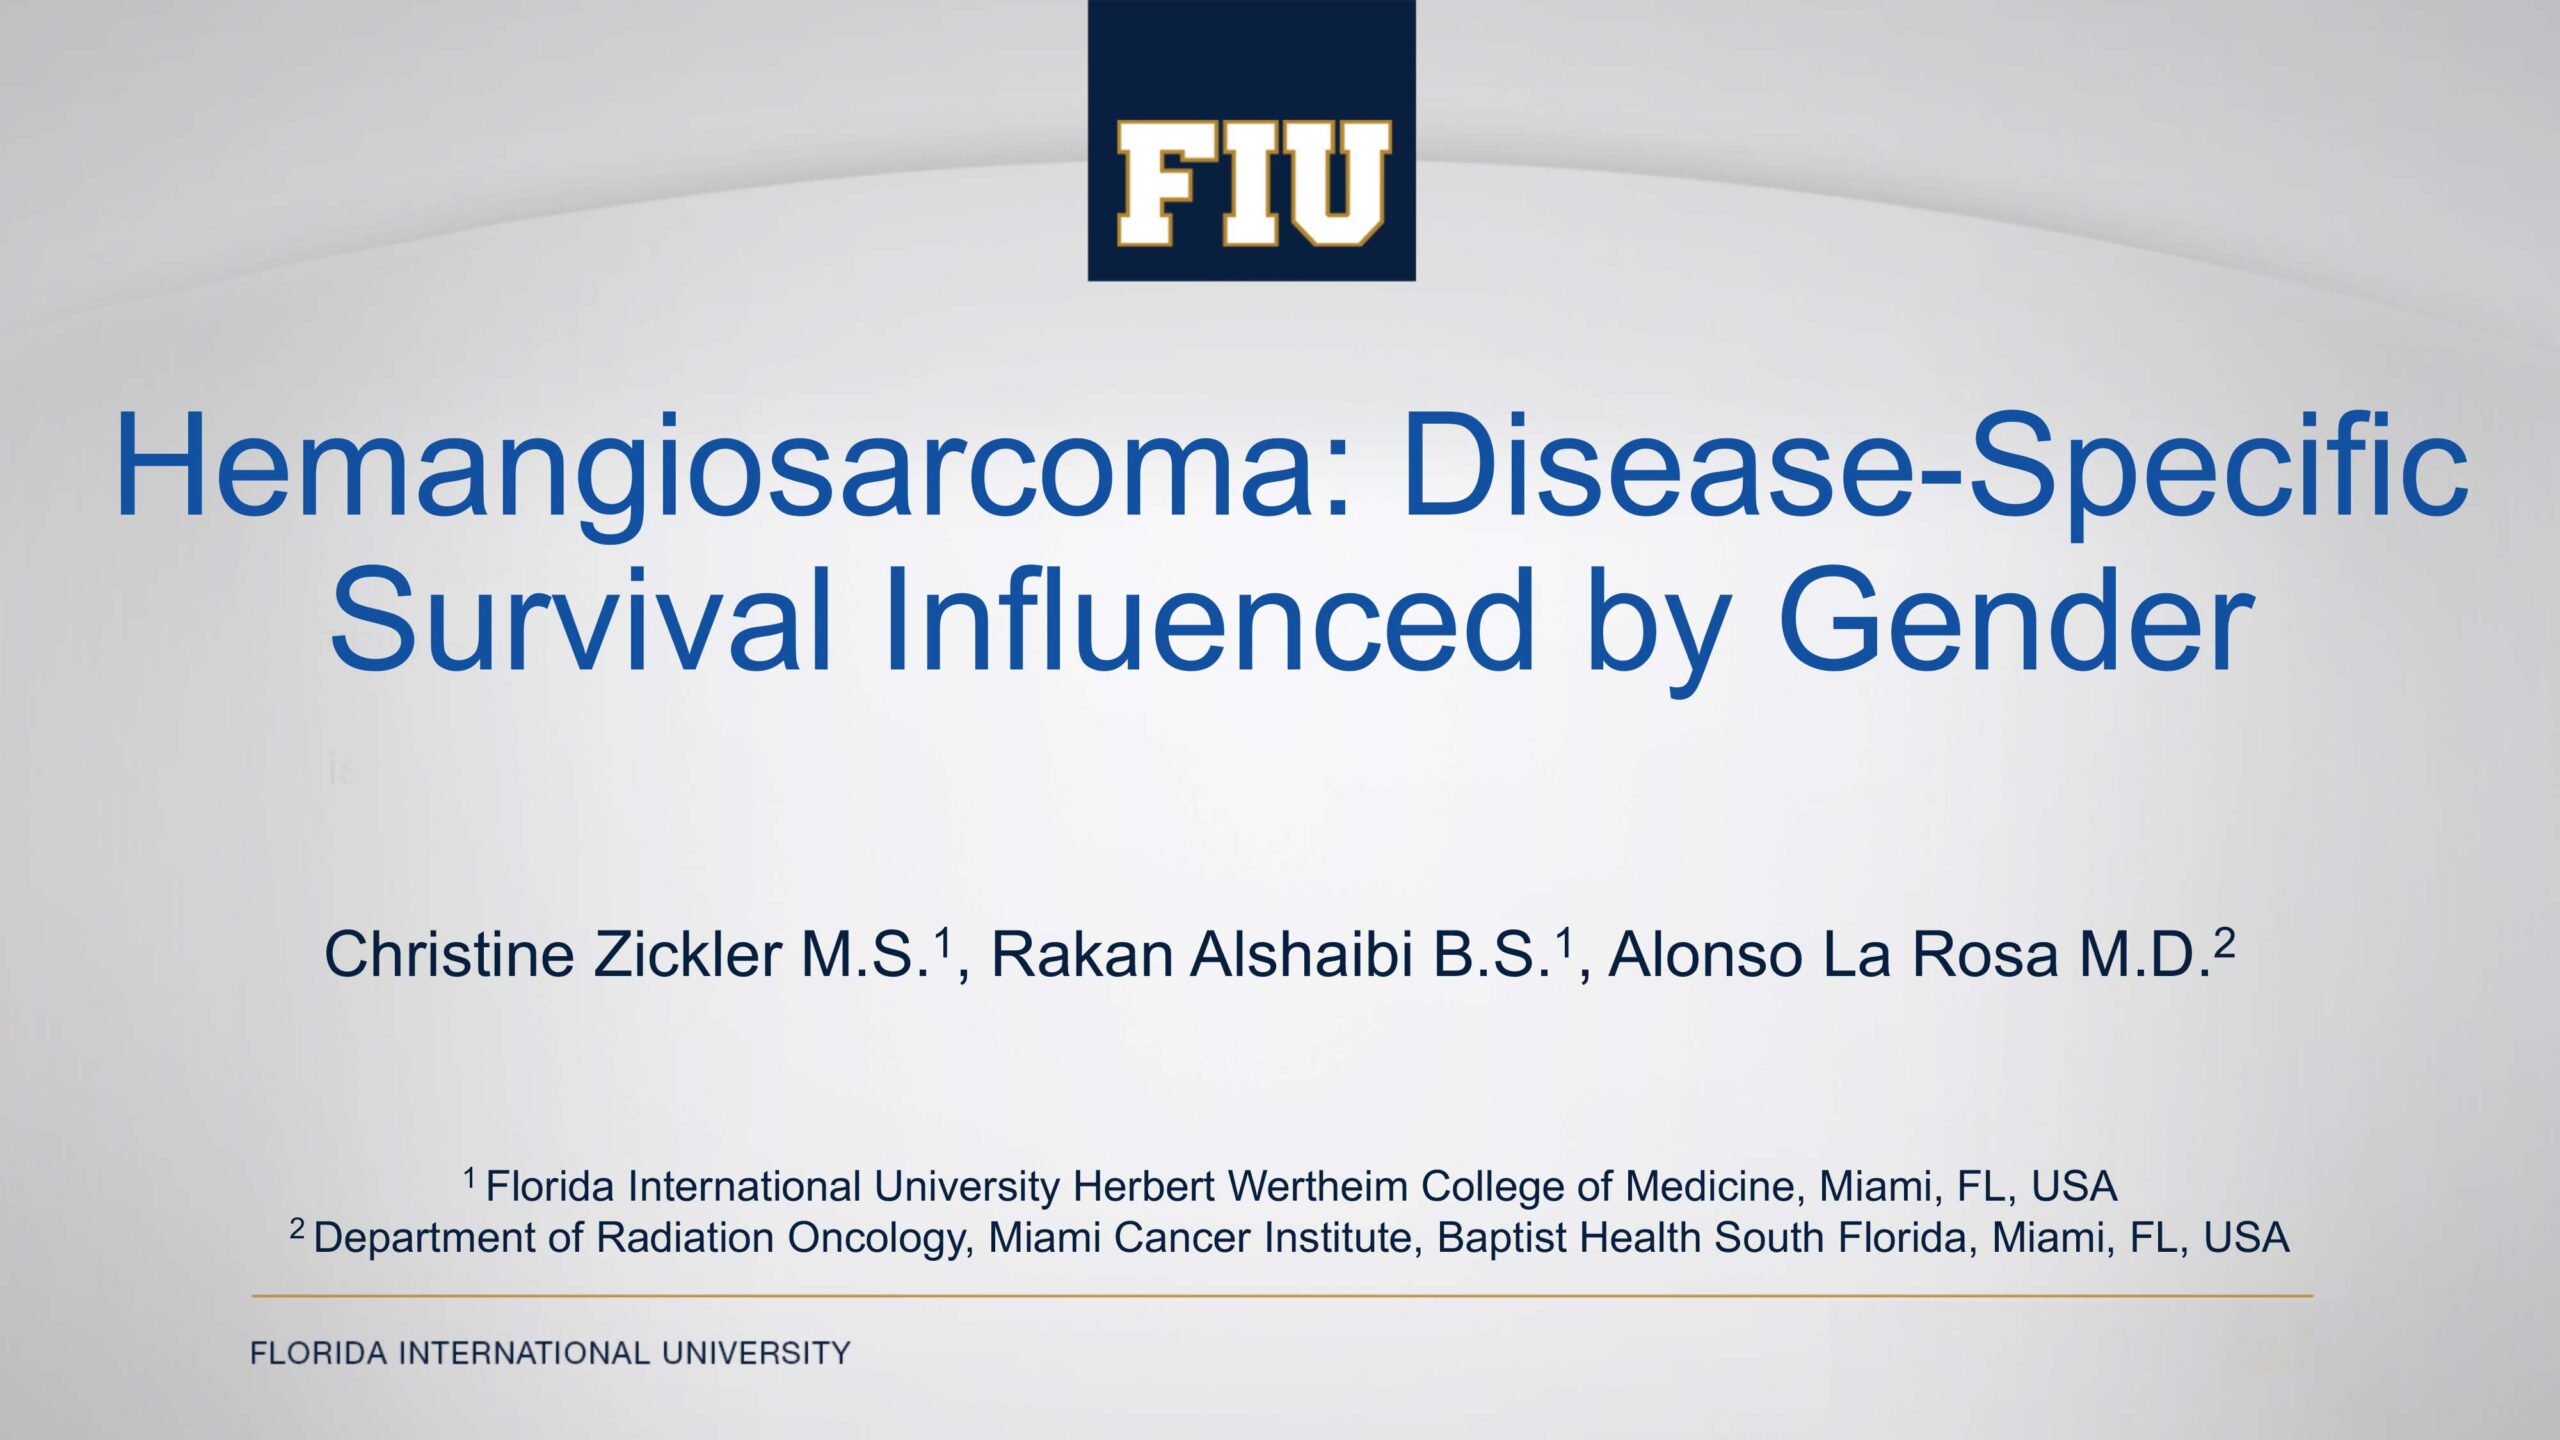 Hemangiosarcoma: Disease-Specific Survival Influenced by Gender